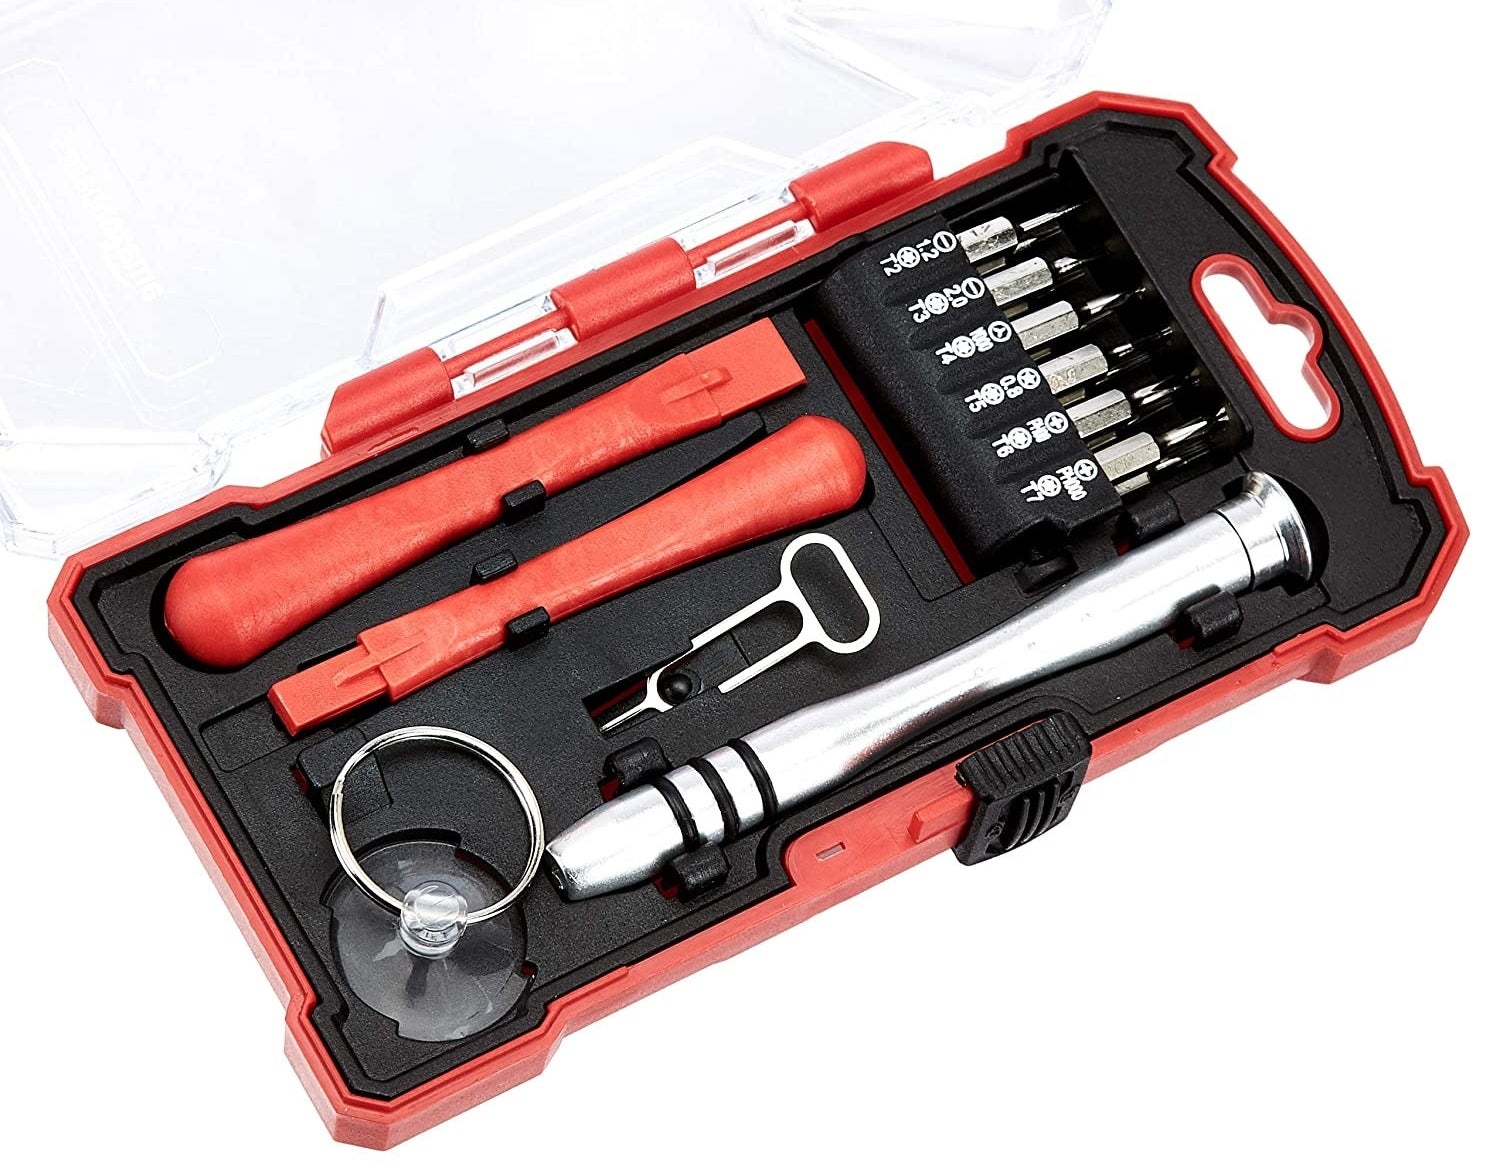 A screwdriver kit box in black and red with multiple tools in it